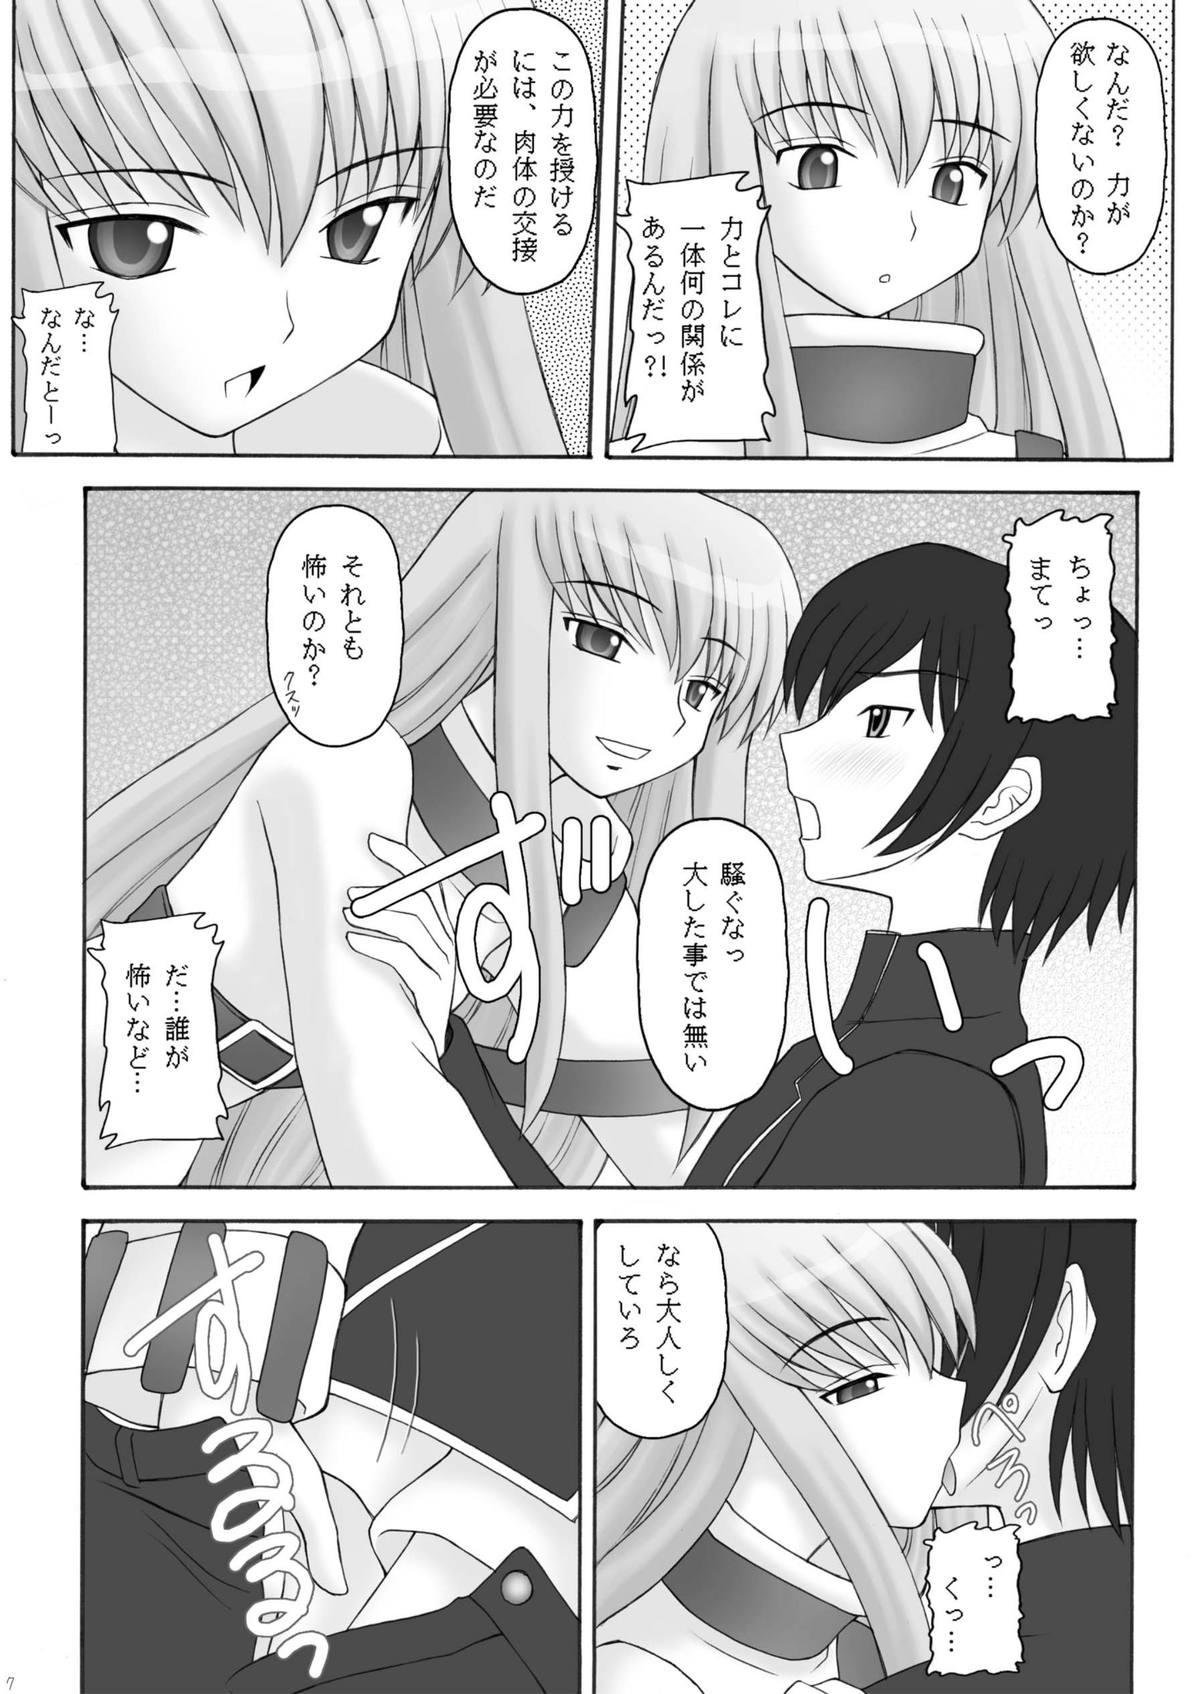 Ano C×2 - Code geass Trannies - Page 7